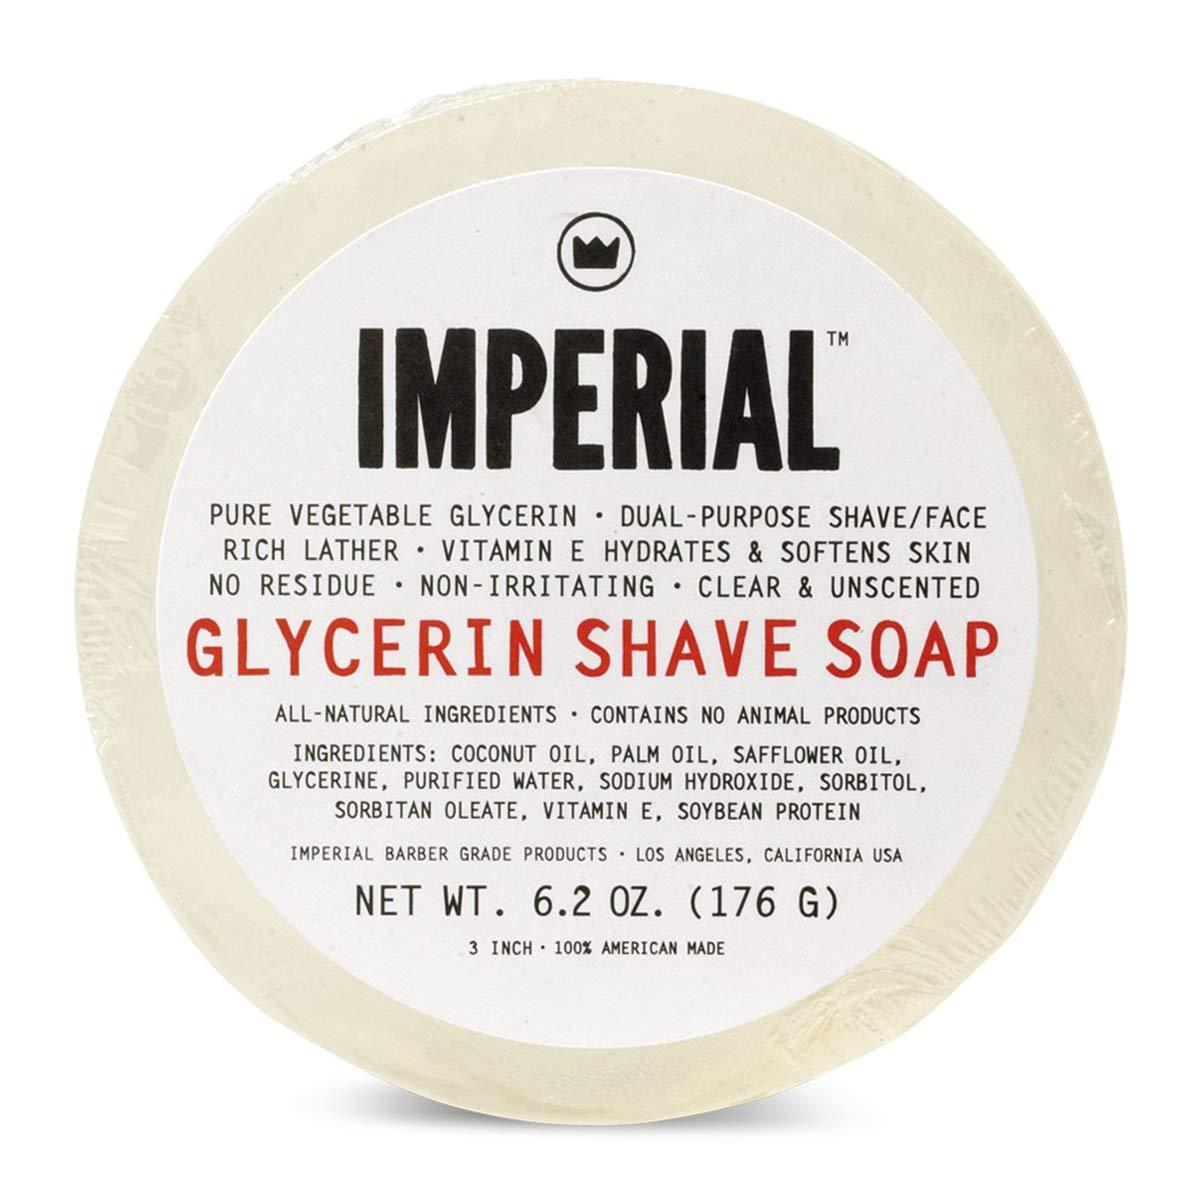 Primary image of Glycerin Shave Soap